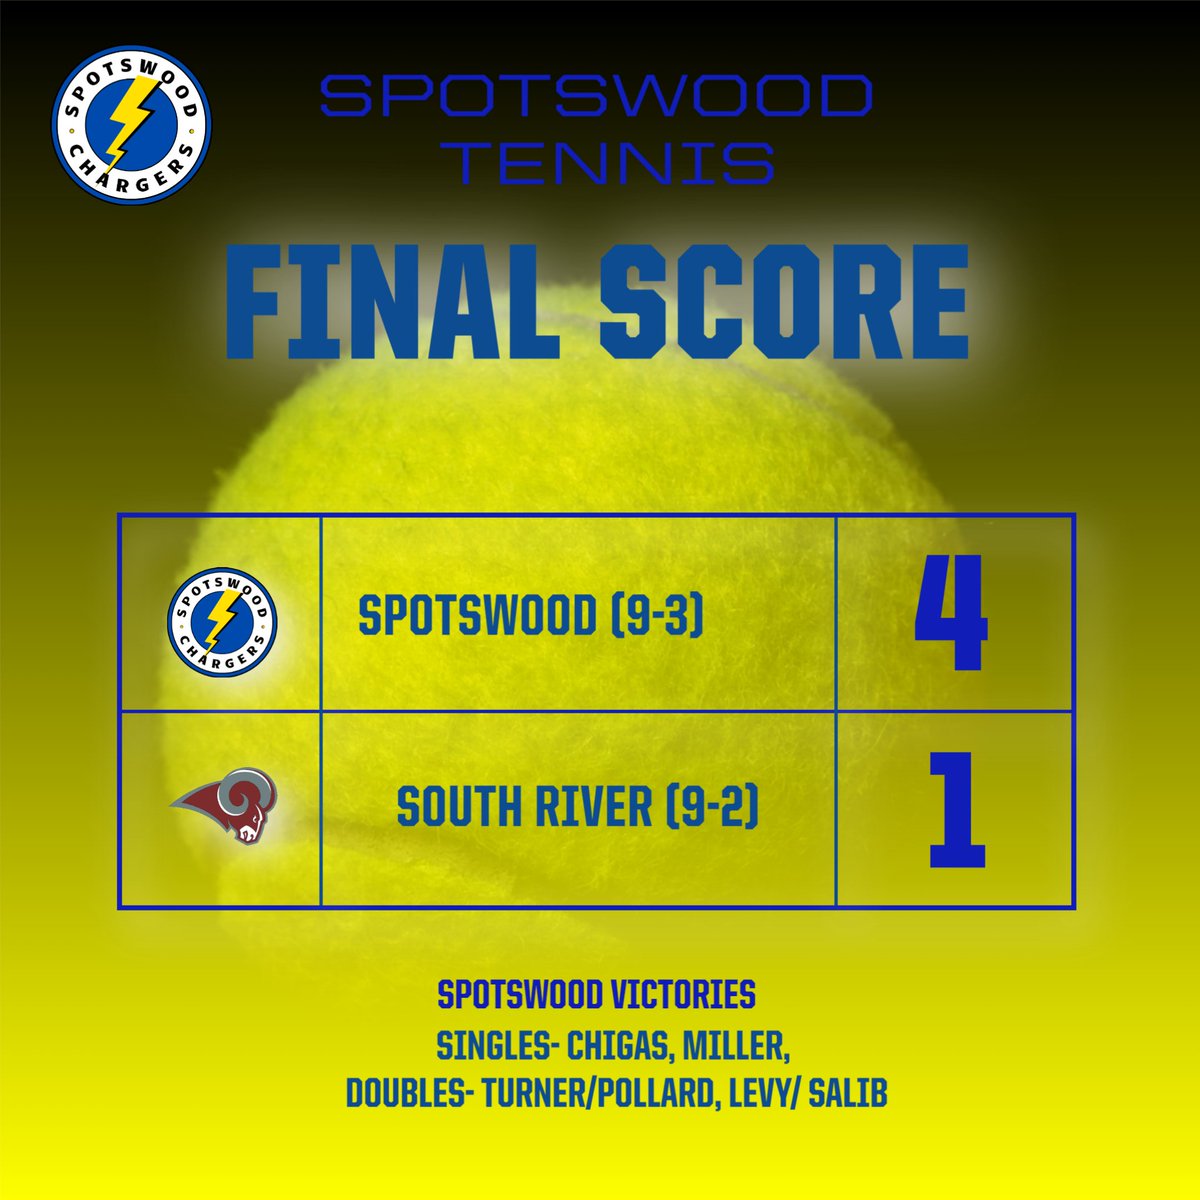 Spotswood moved to 9-3 on the season and its fourth win in a row over South River. highschoolsports.nj.com/game/934460